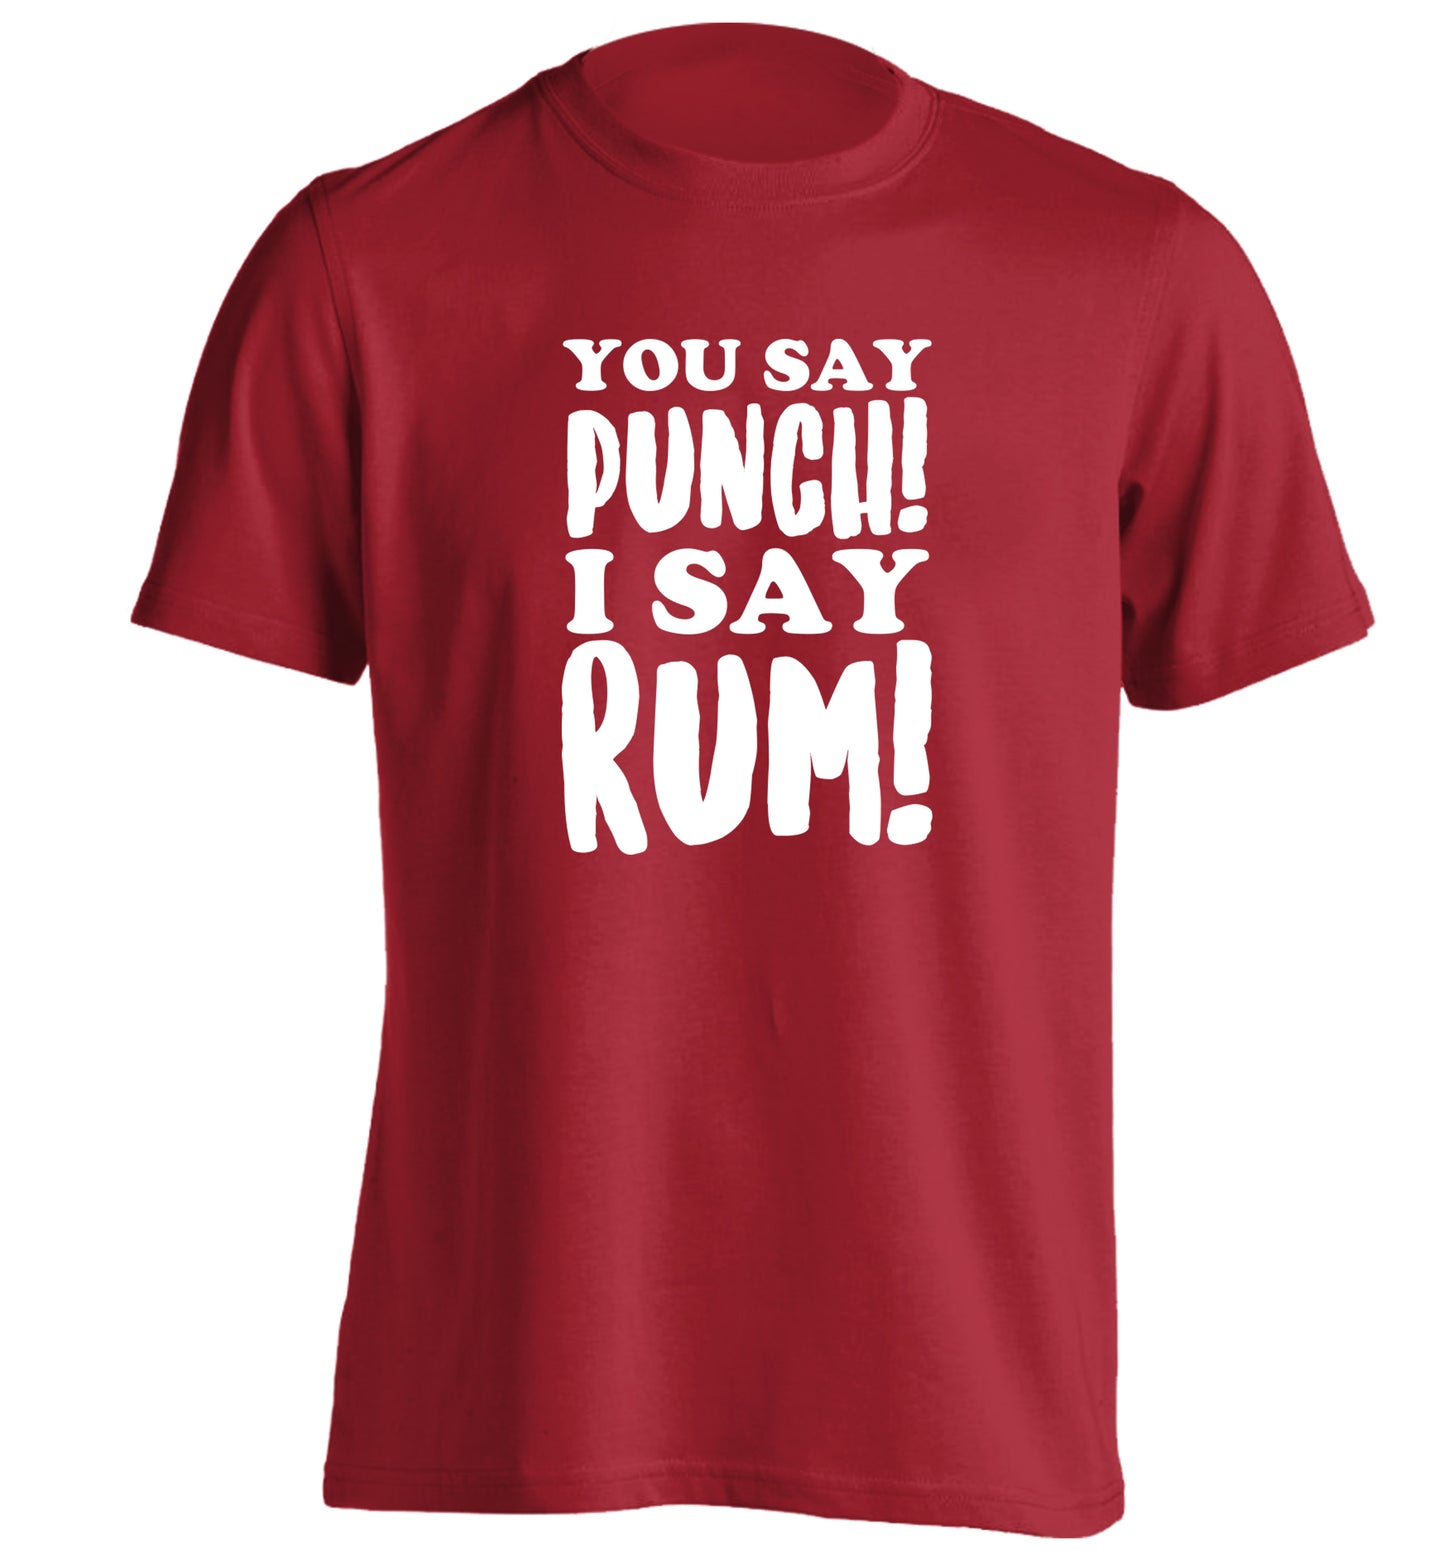 You say punch I say rum! adults unisex red Tshirt 2XL